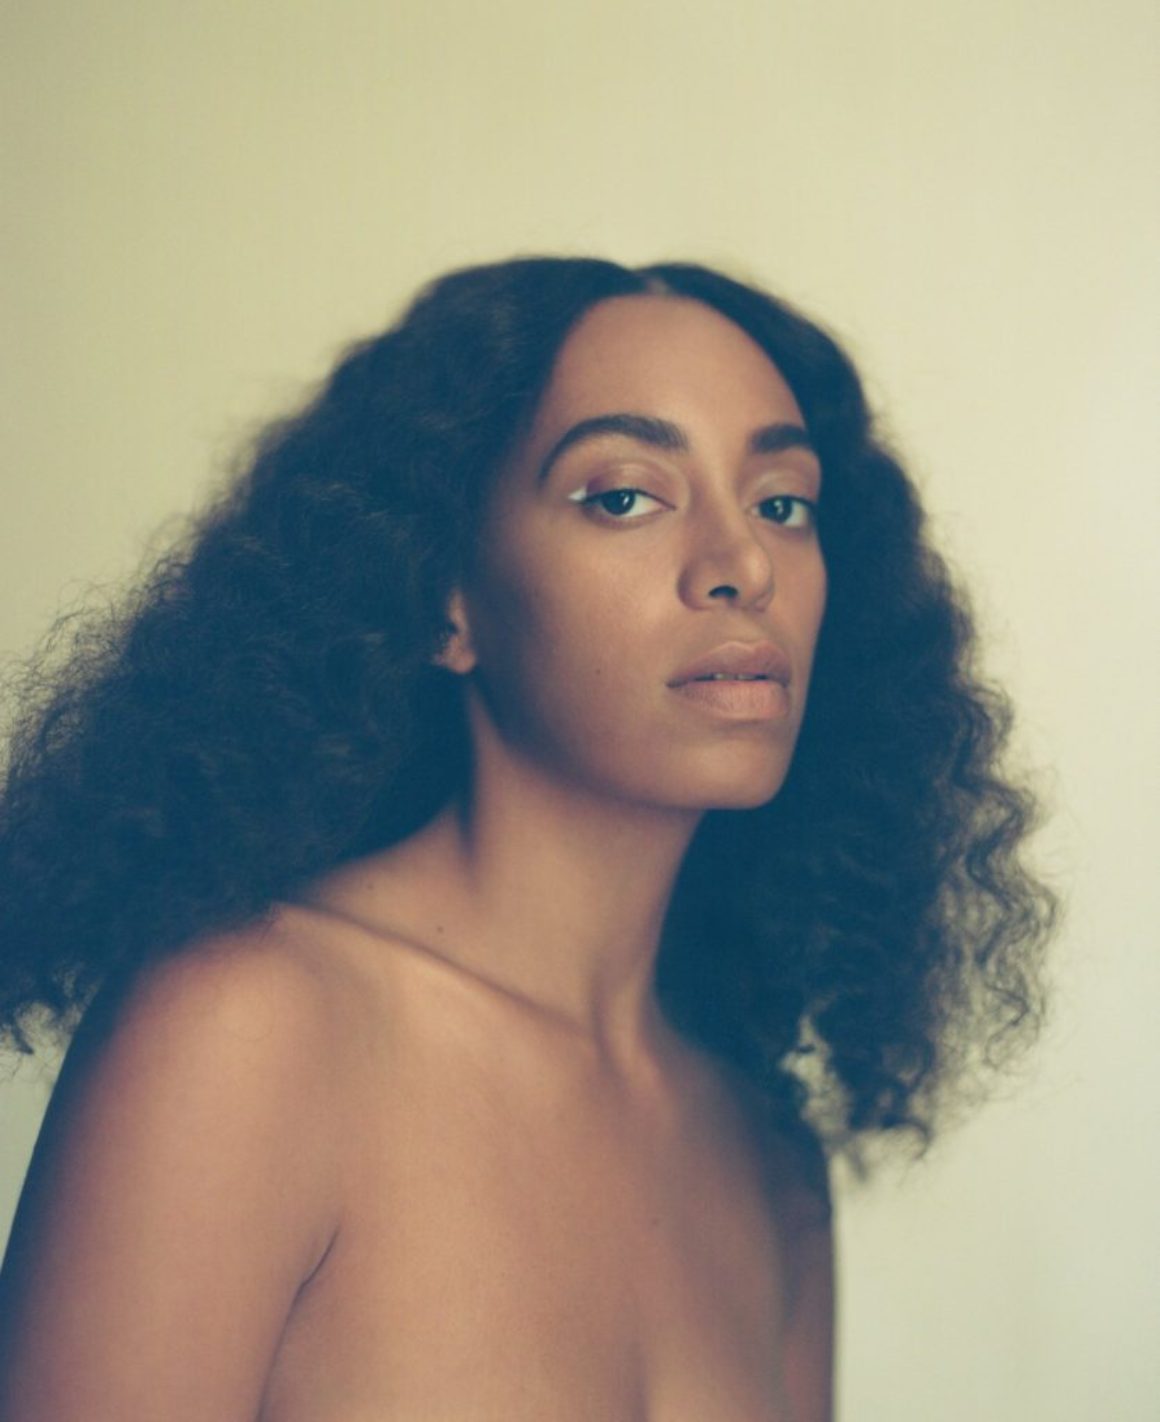 Solange Supports Sending Students to DC